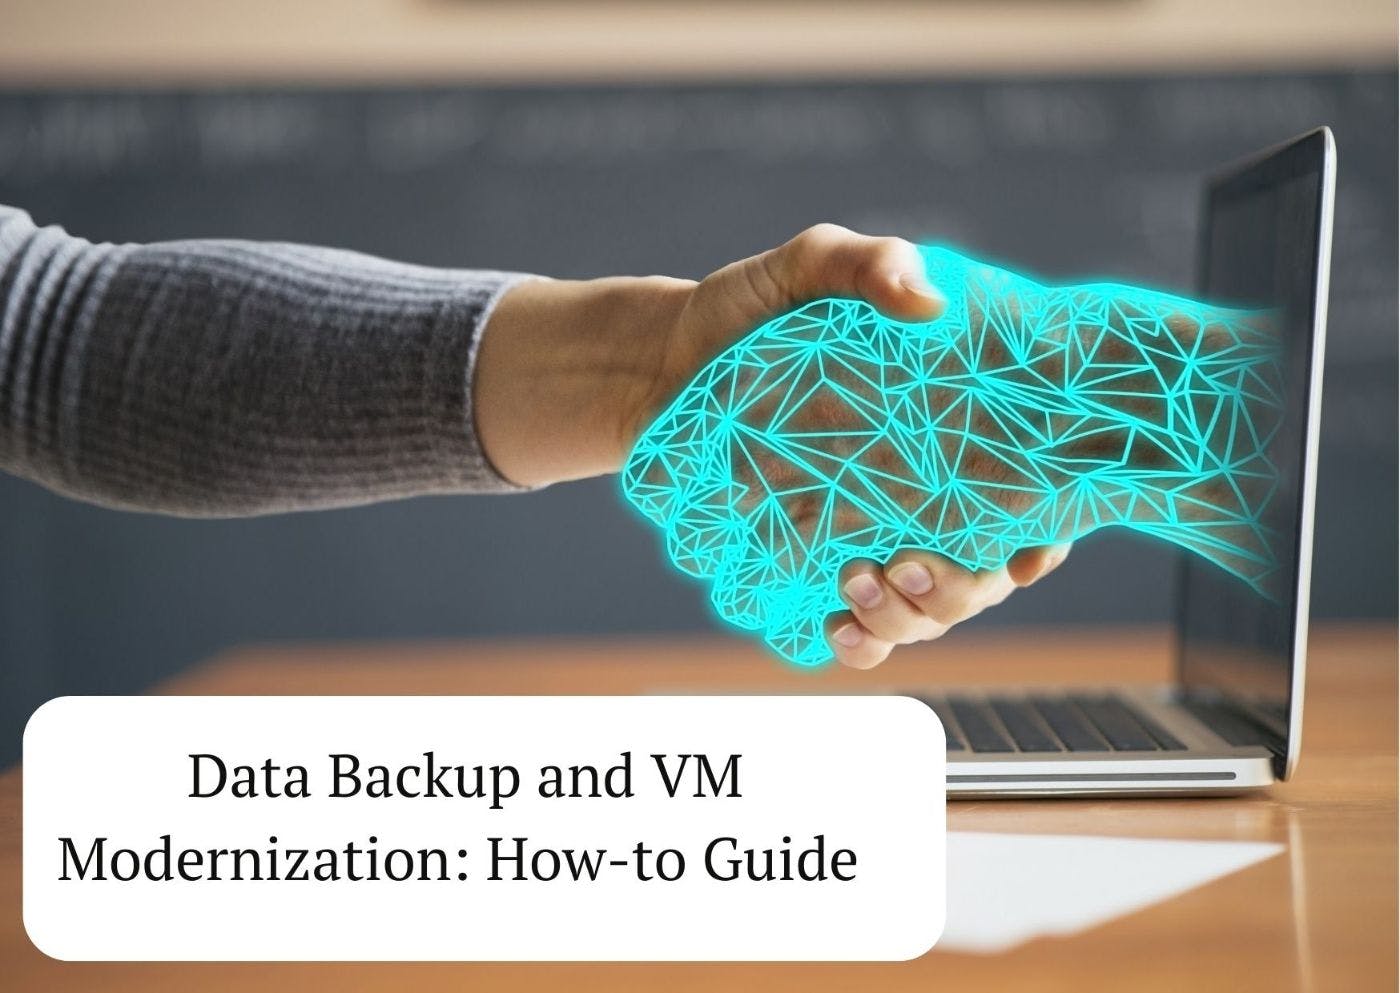 featured image - A How-to Guide for Data Backup and VM Modernization